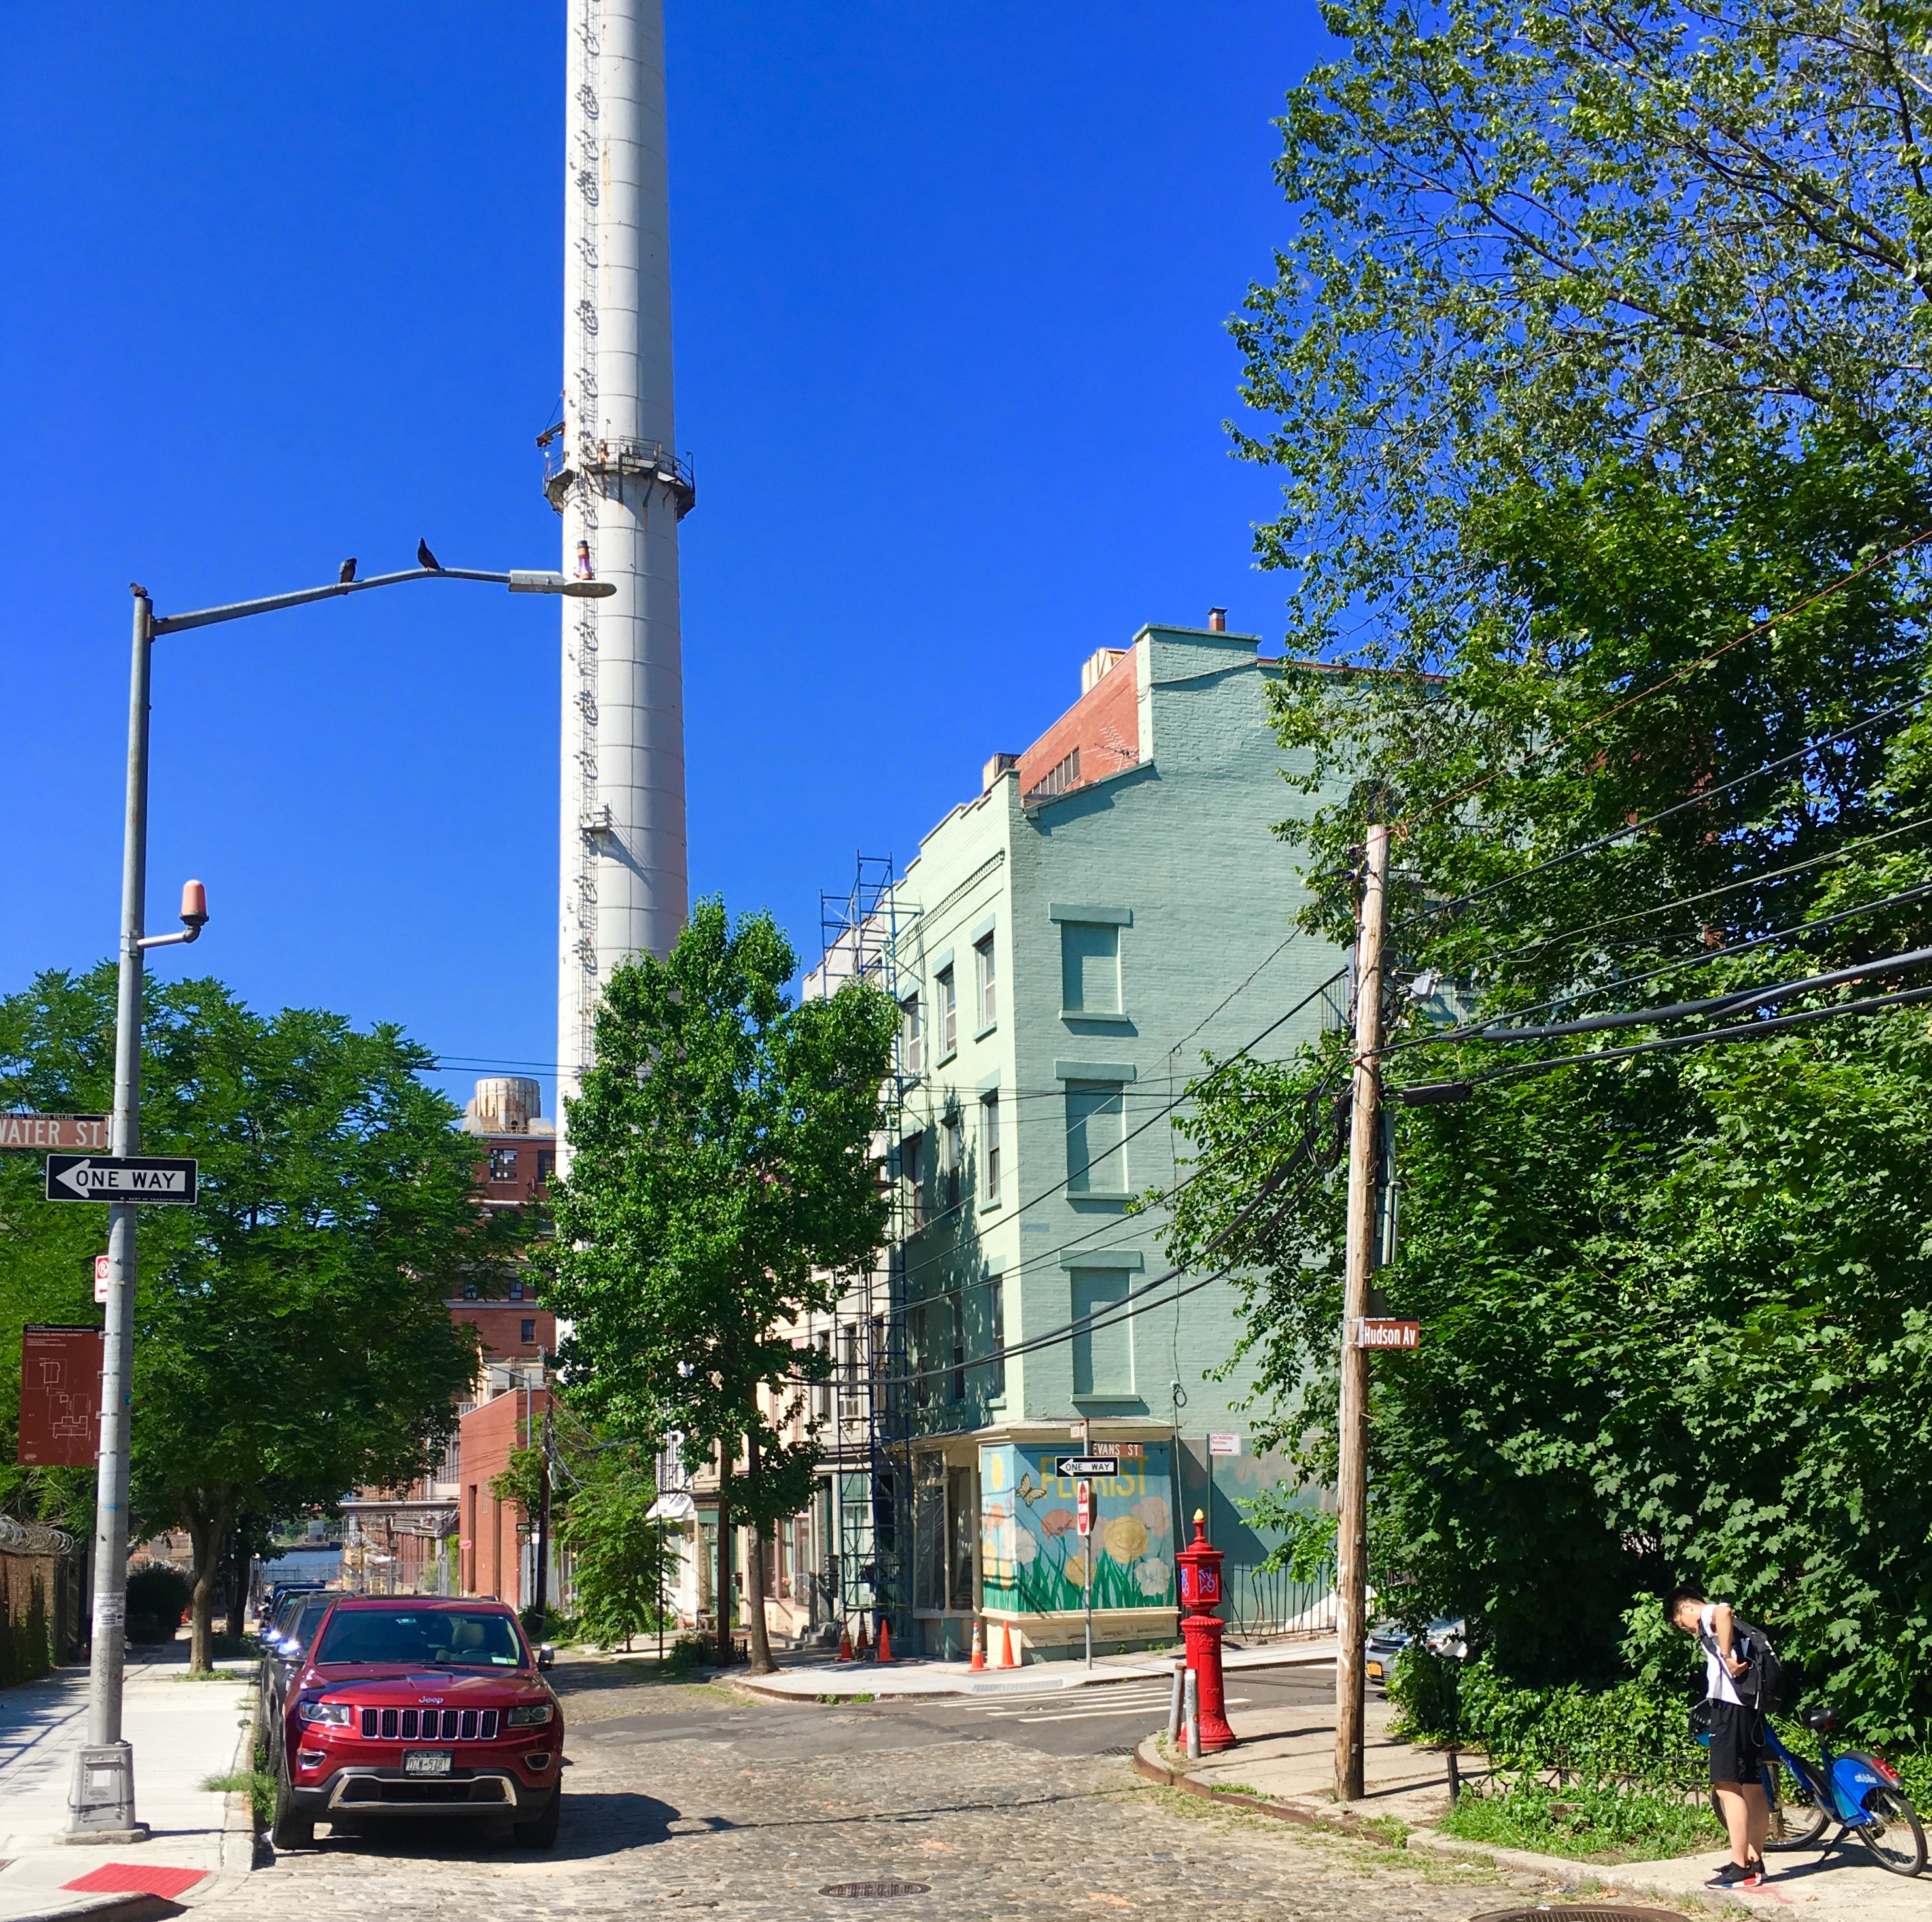 These Hudson Avenue rowhouses are located so close to Con Ed’s smokestack. Eagle photo by Lore Croghan